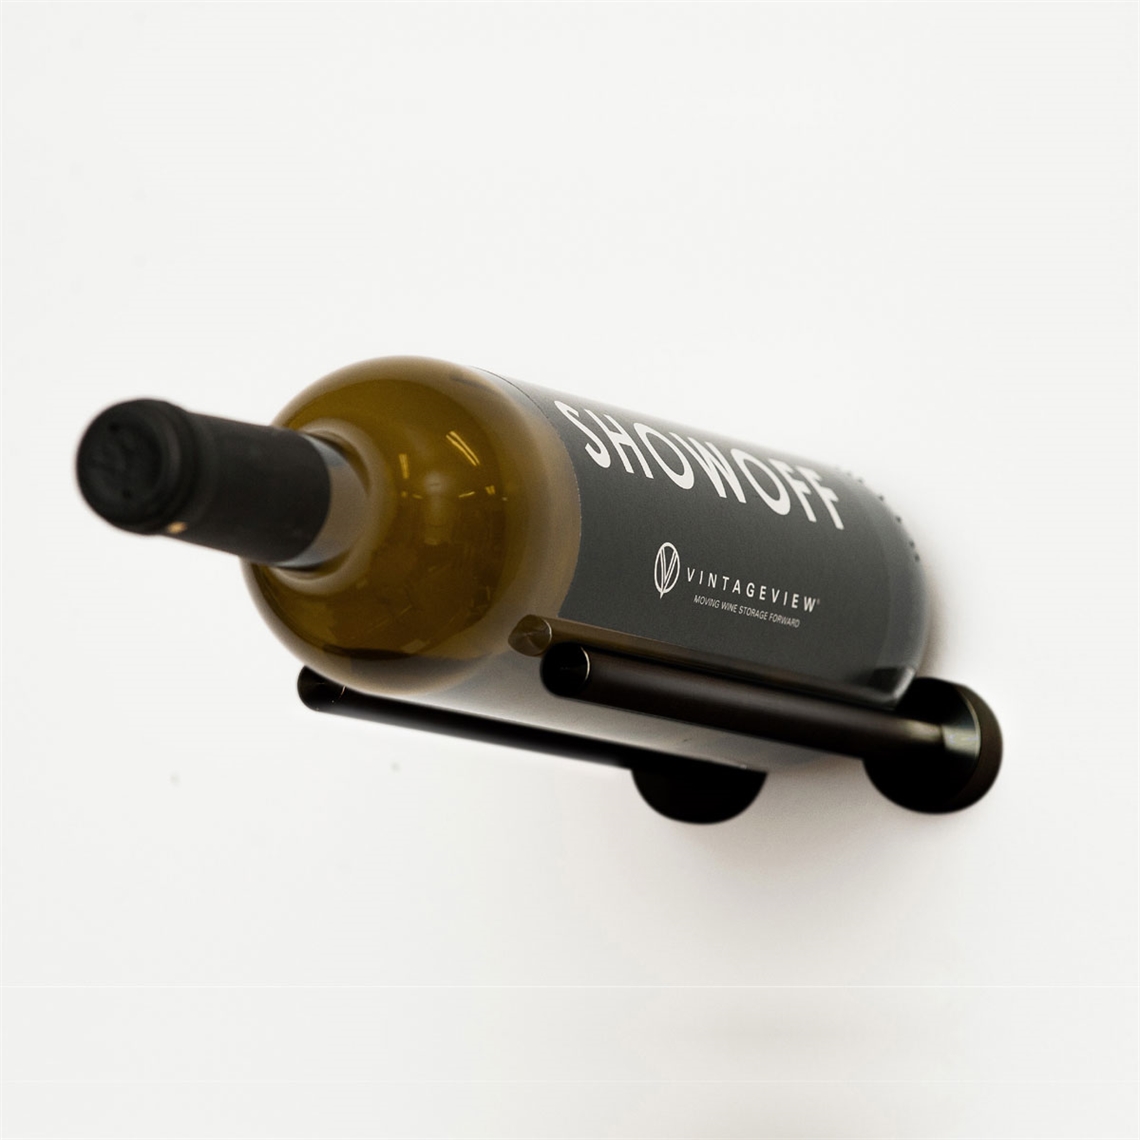 View more counter top wine racks from our Wall Mounted Wine Racks range